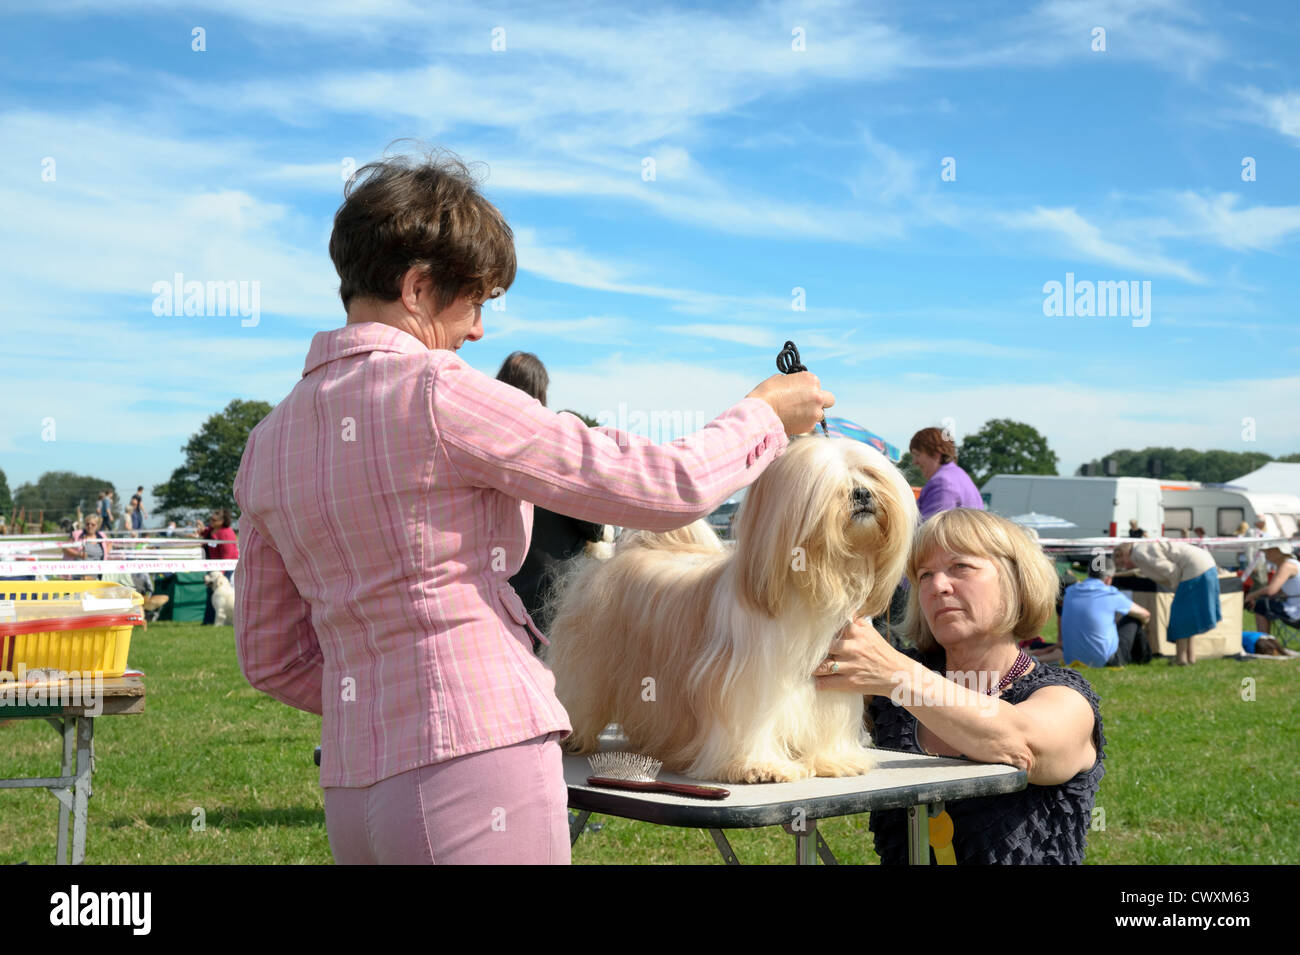 Dog show judging at Kington Show, Herefordshire, UK. Woman judge examining dog standing on a table. Stock Photo